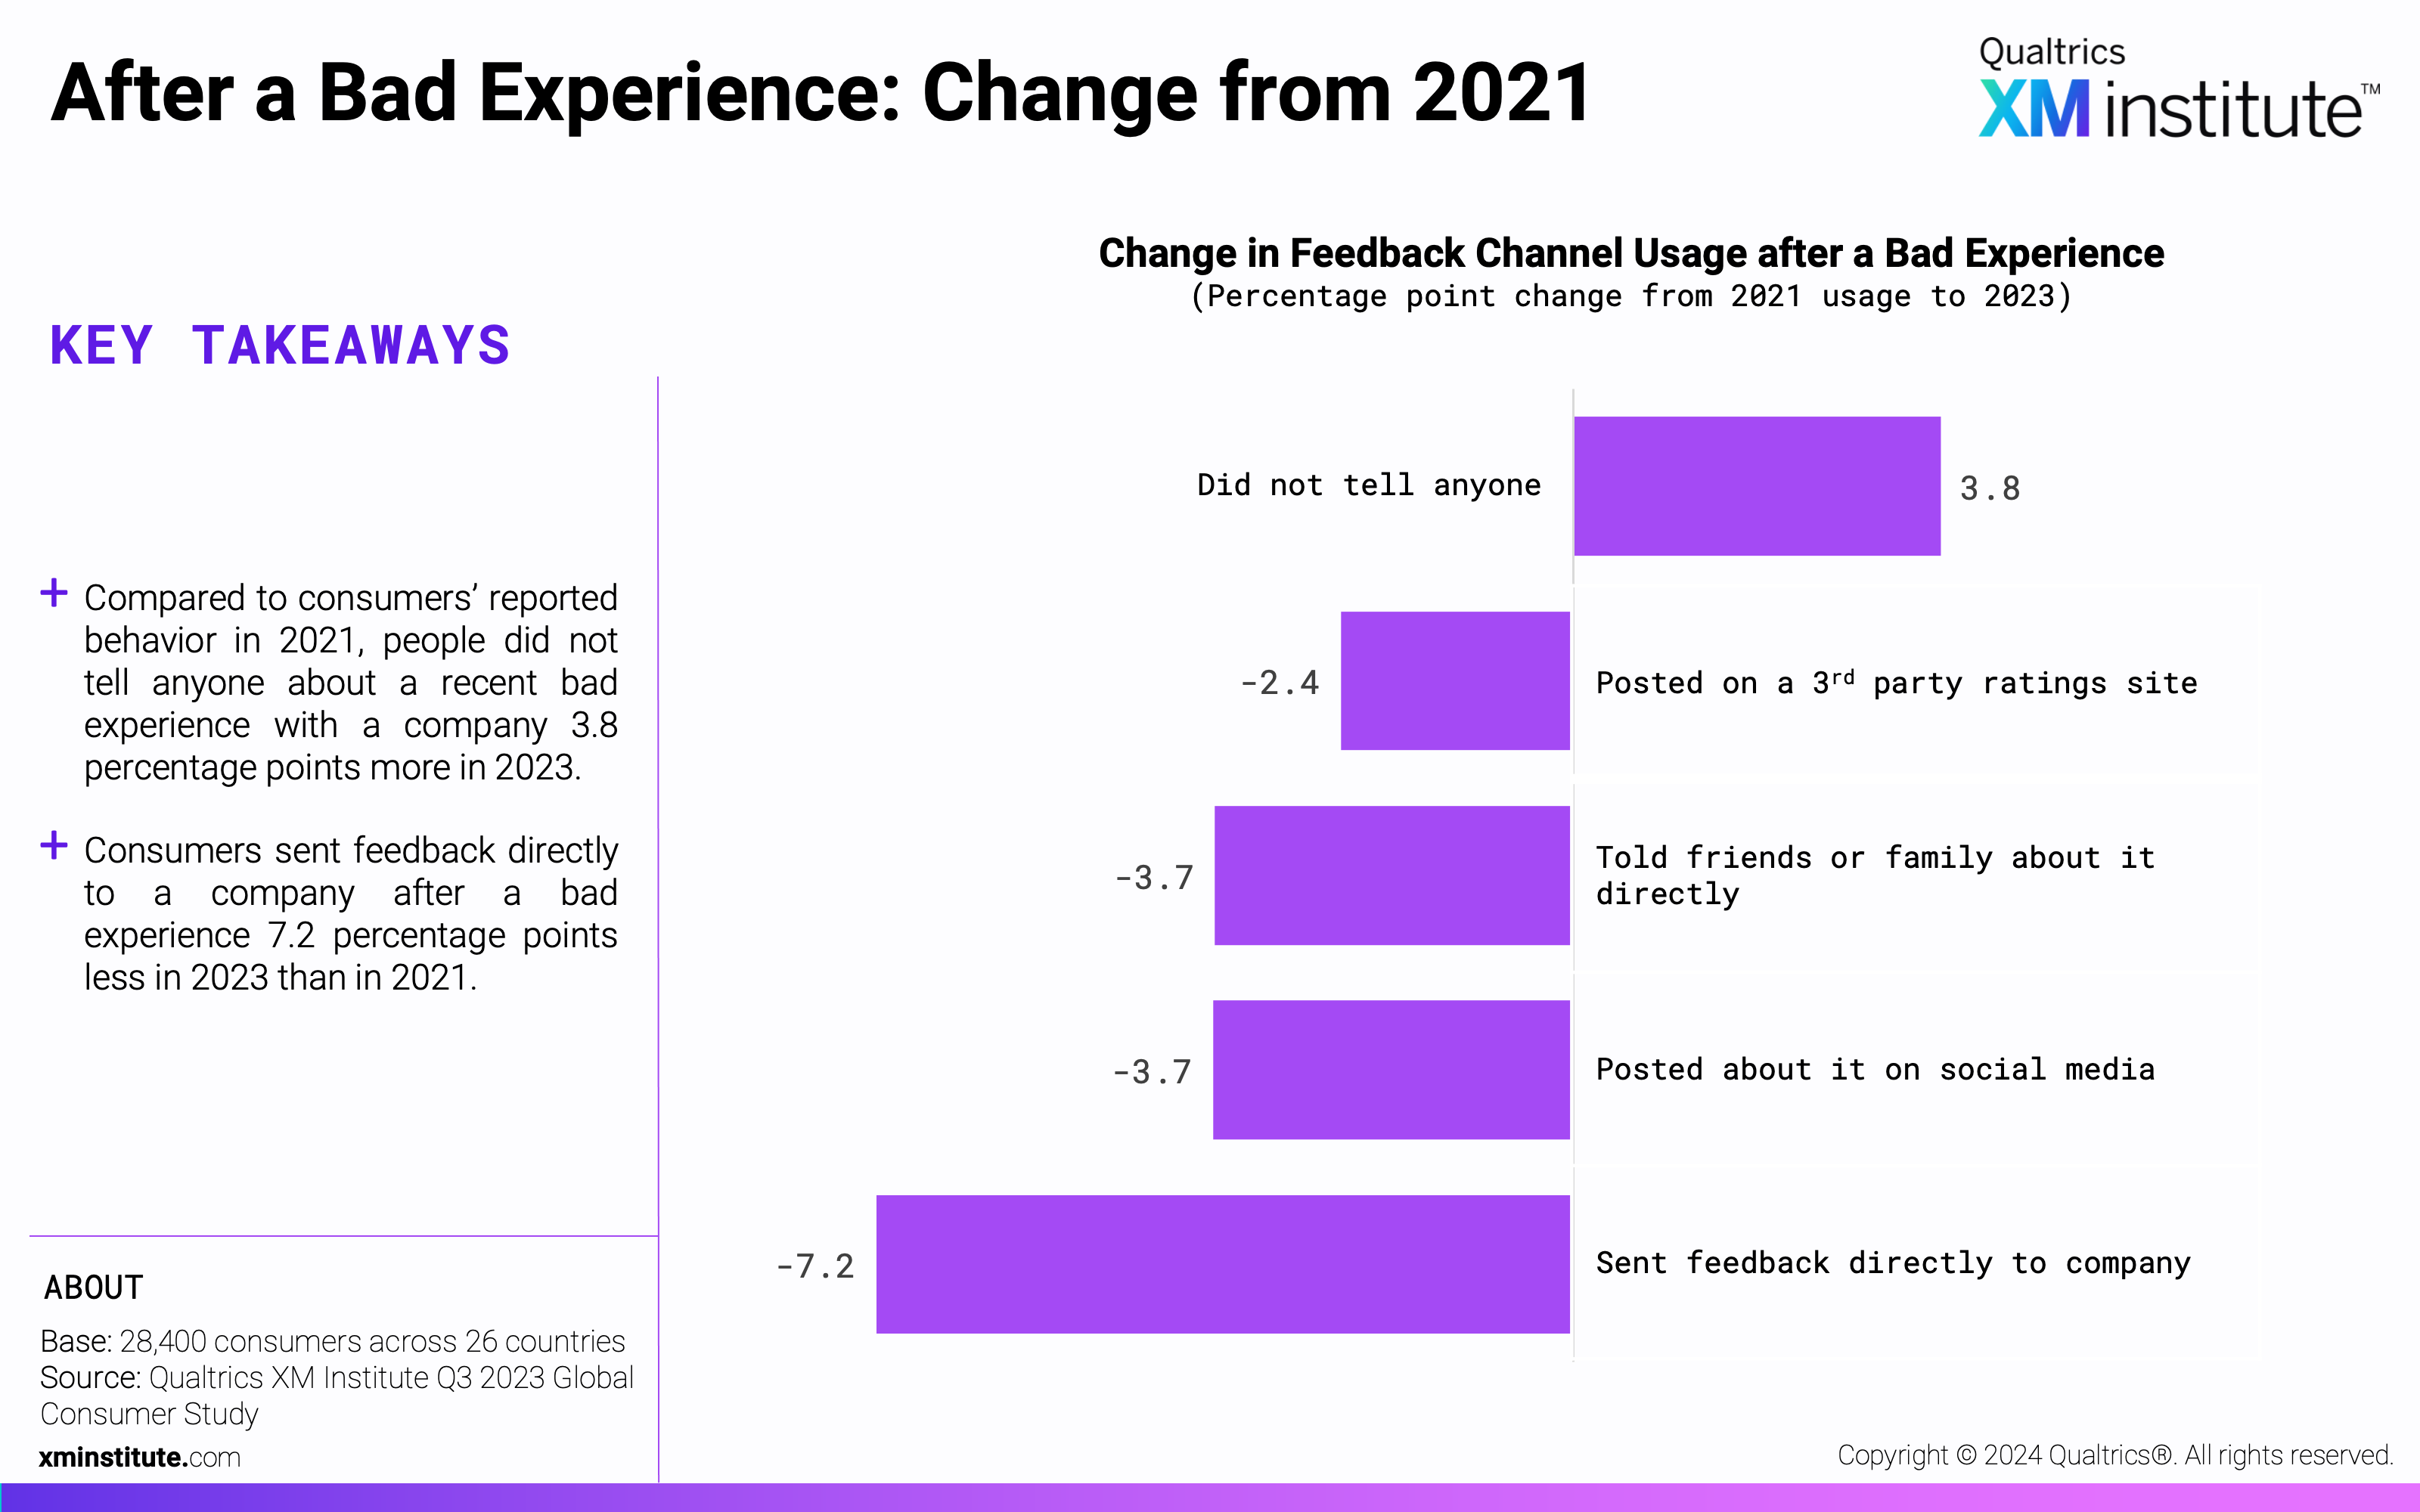 This chart showed the percentage-point change in consumers sharing feedback using each method after a bad experience with a company in 2024 compared to 2021. 